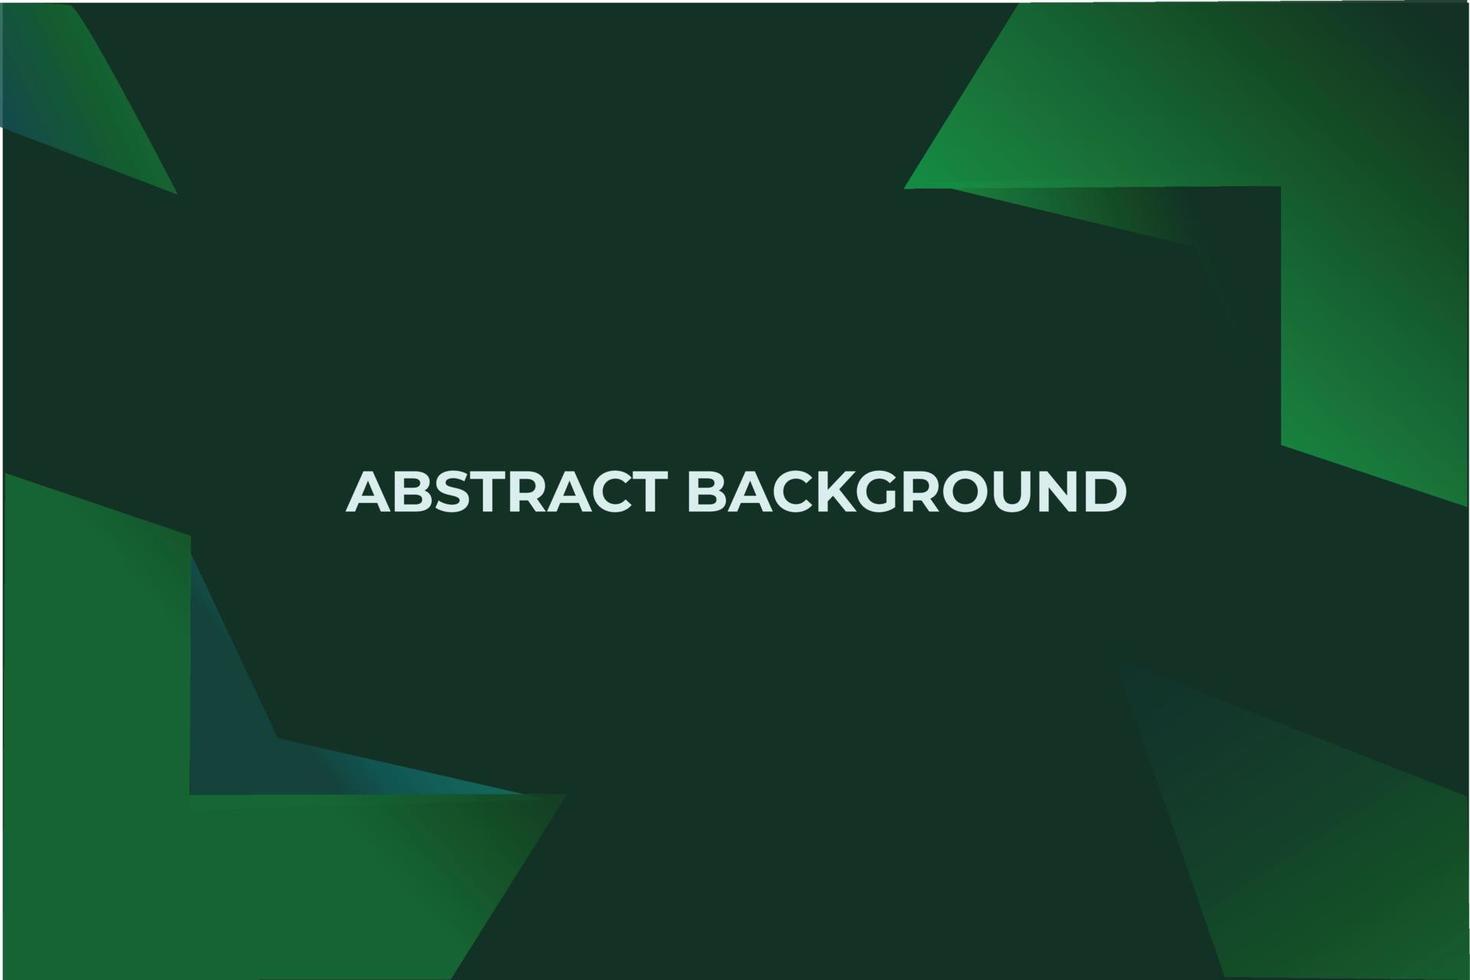 Abstract Background with new green crystal effect vector